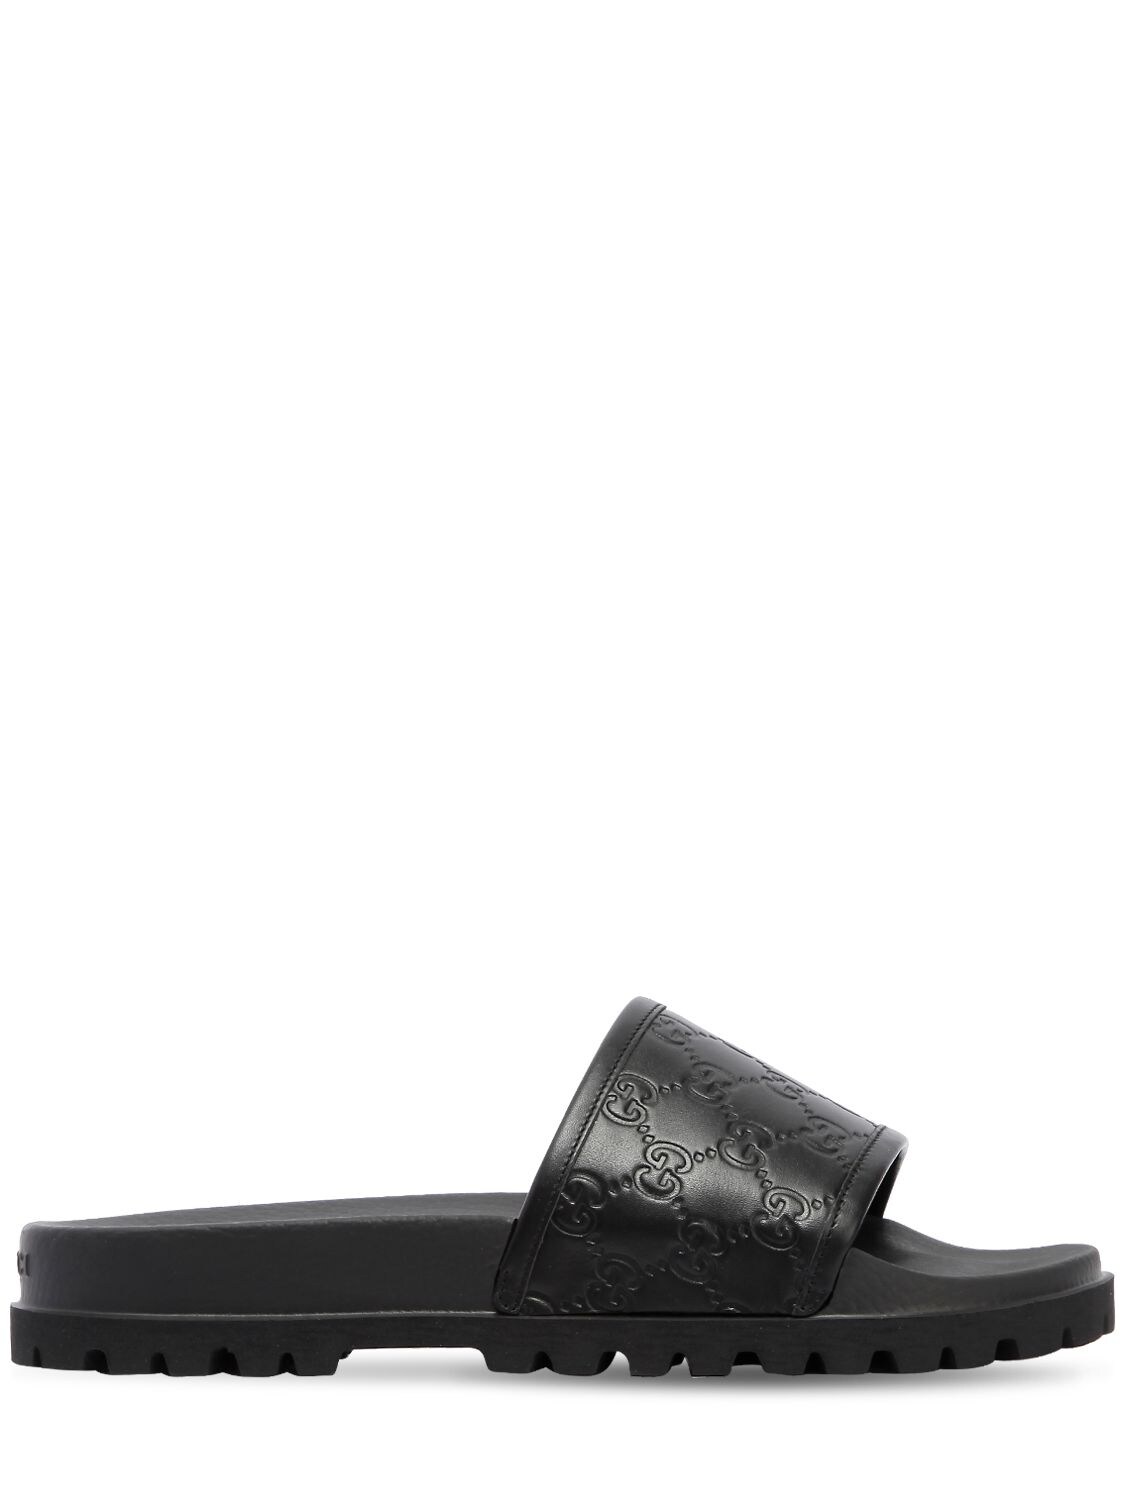 GUCCI GG EMBOSSED LEATHER SLIDE SANDALS,67IH0W011-MTAwMA2